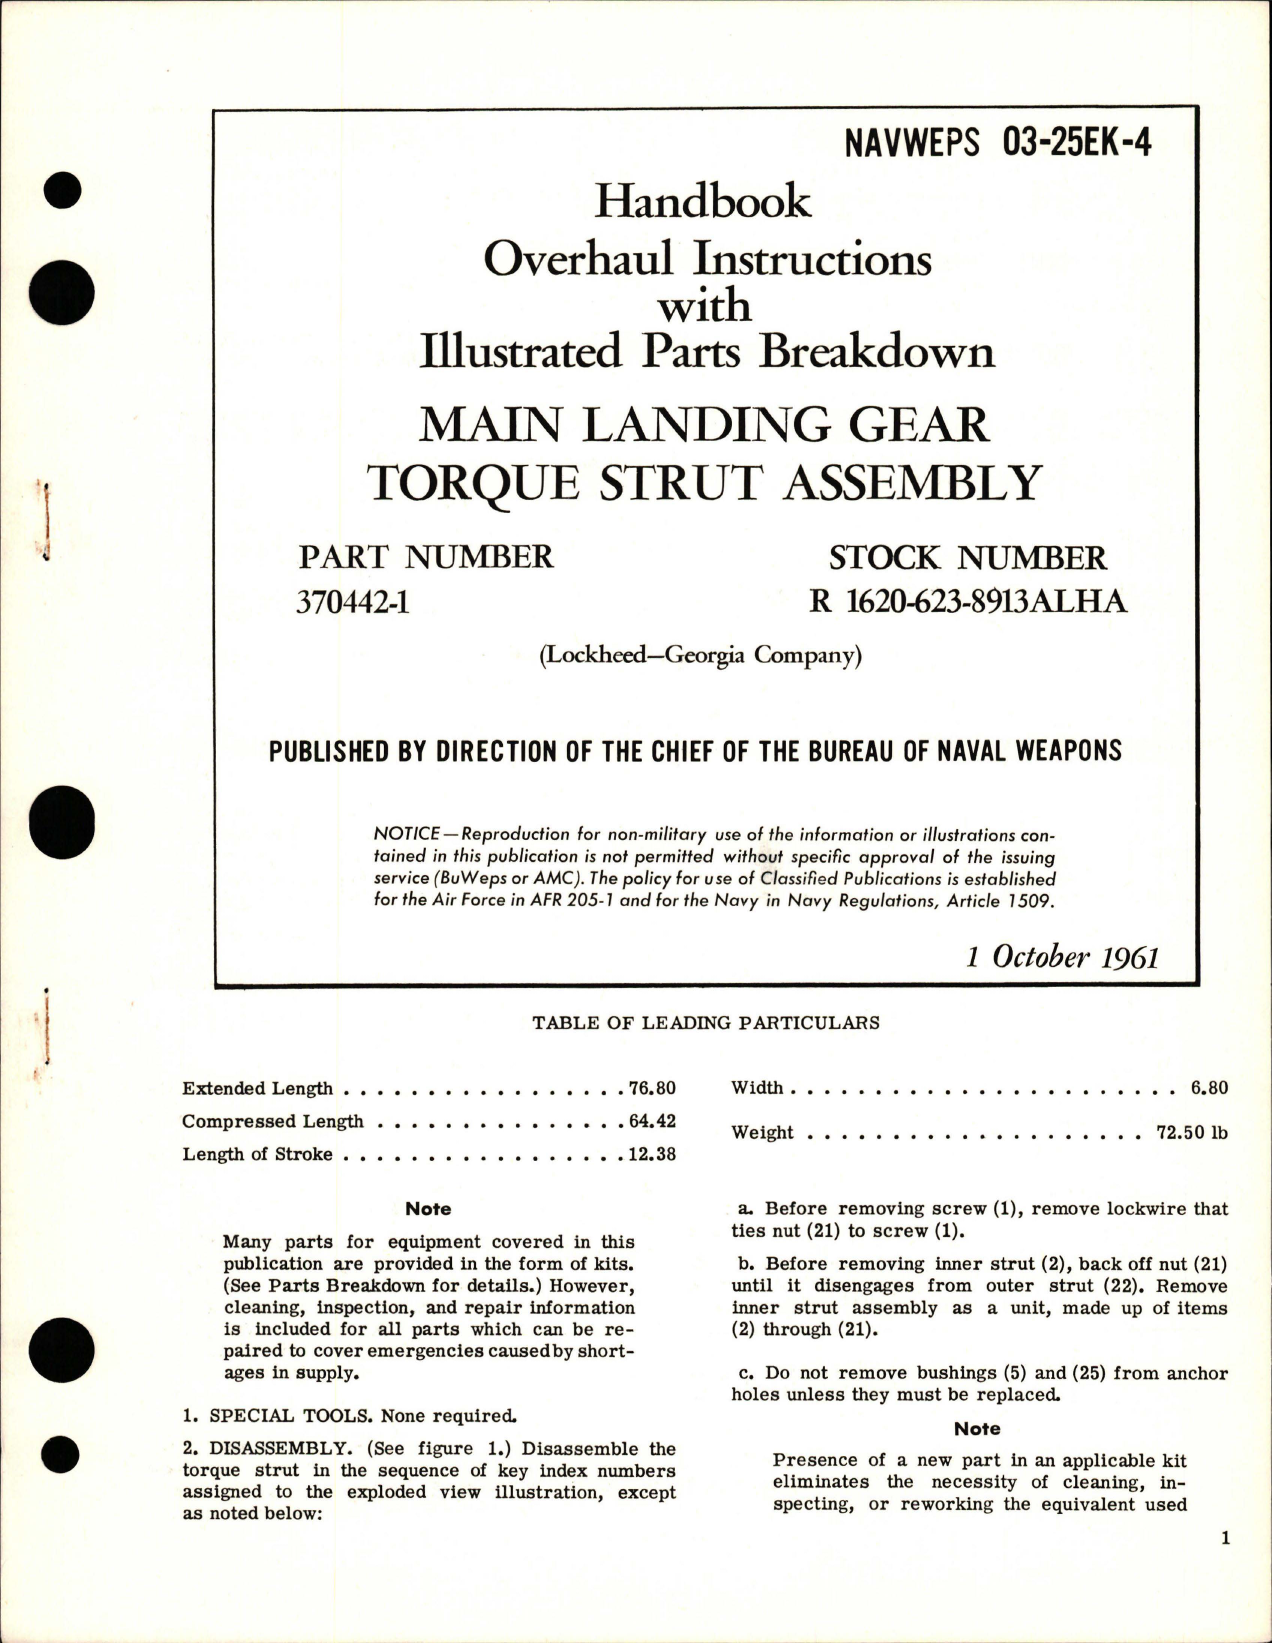 Sample page 1 from AirCorps Library document: Overhaul Instructions with Illustrated Parts Breakdown for Main Landing Gear Torque Strut Assembly - Part 370442-1